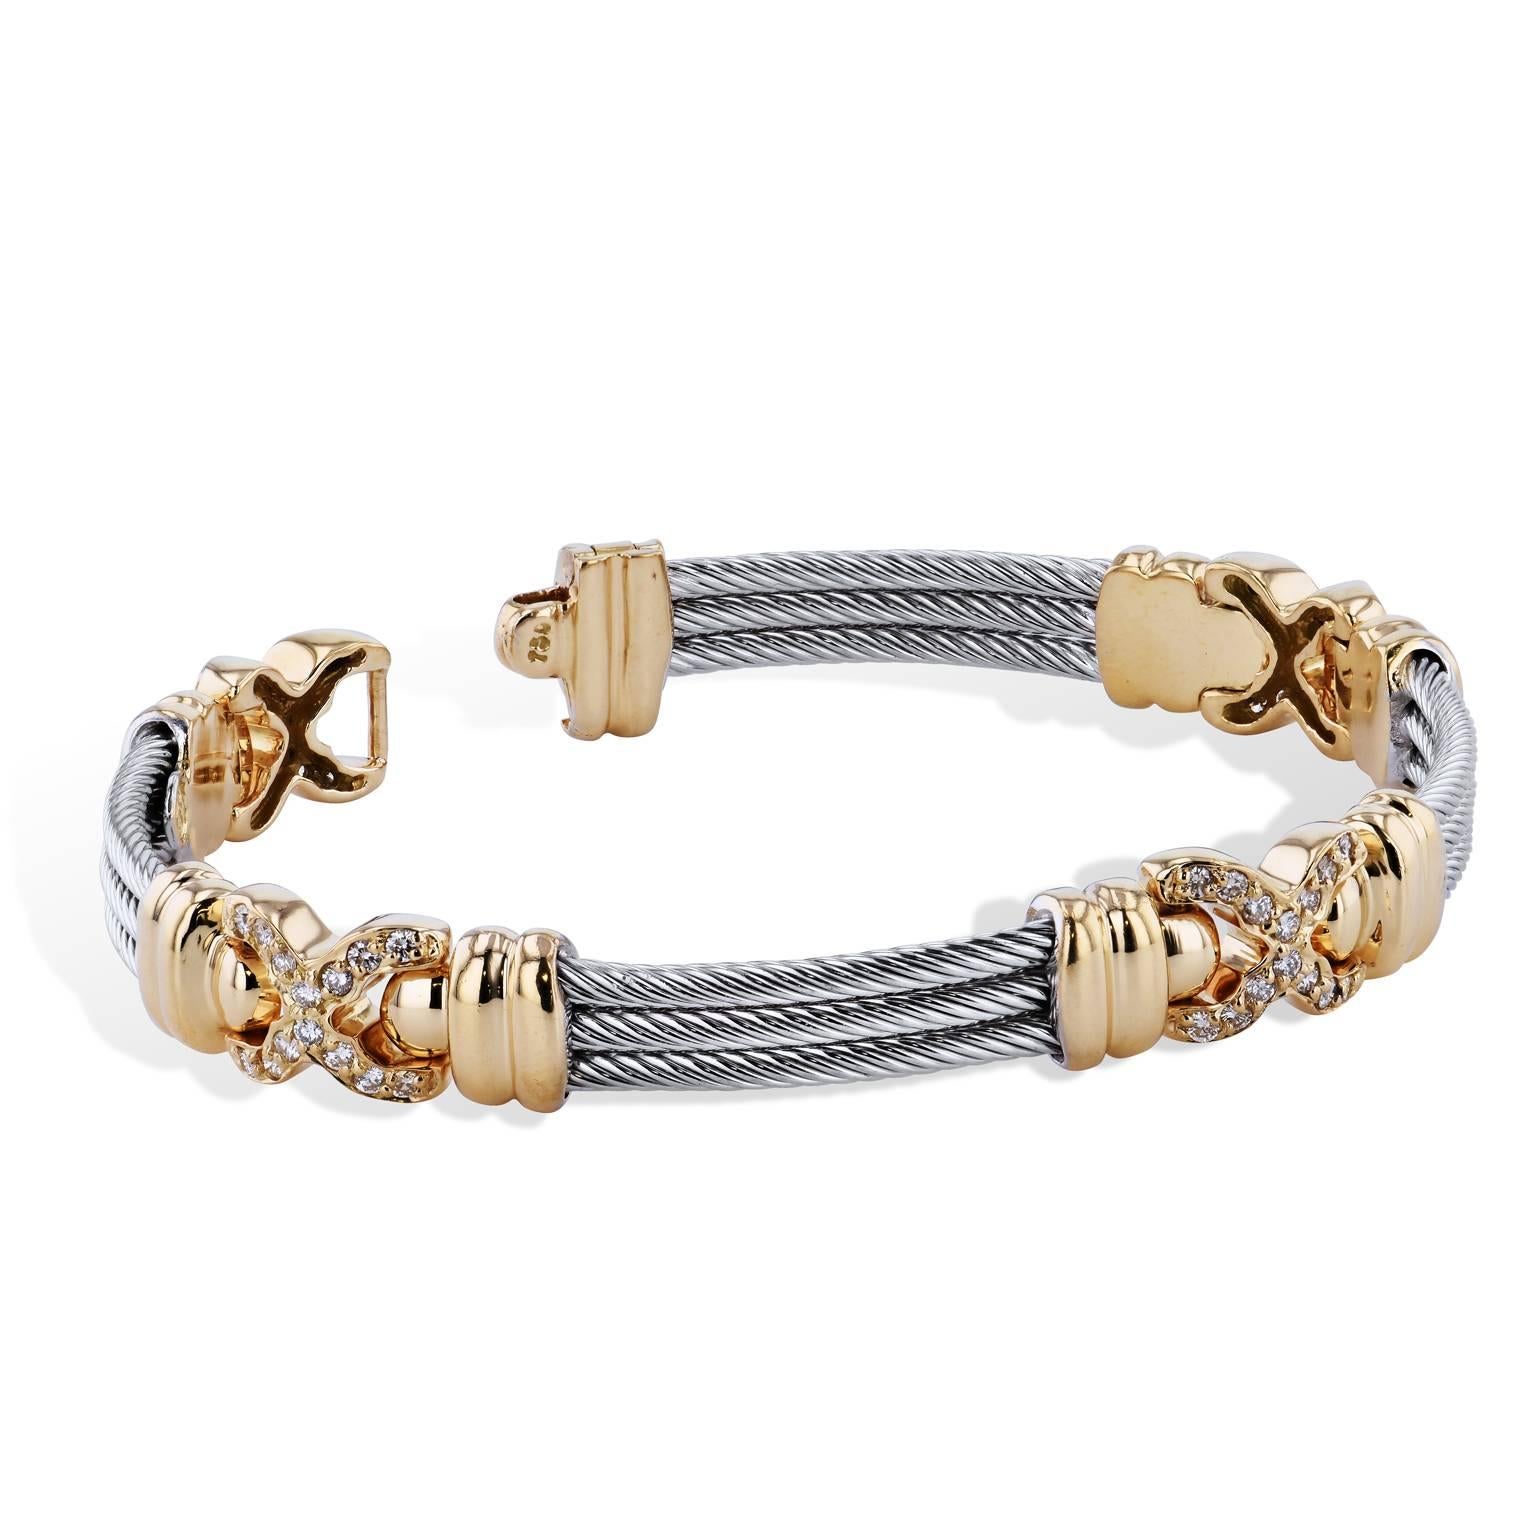 Enjoy this previously loved Phillipe Chariol 18 karat yellow gold bracelet featuring three rows of cable cinctured by fifty-six pave-set diamond in criss-cross design.